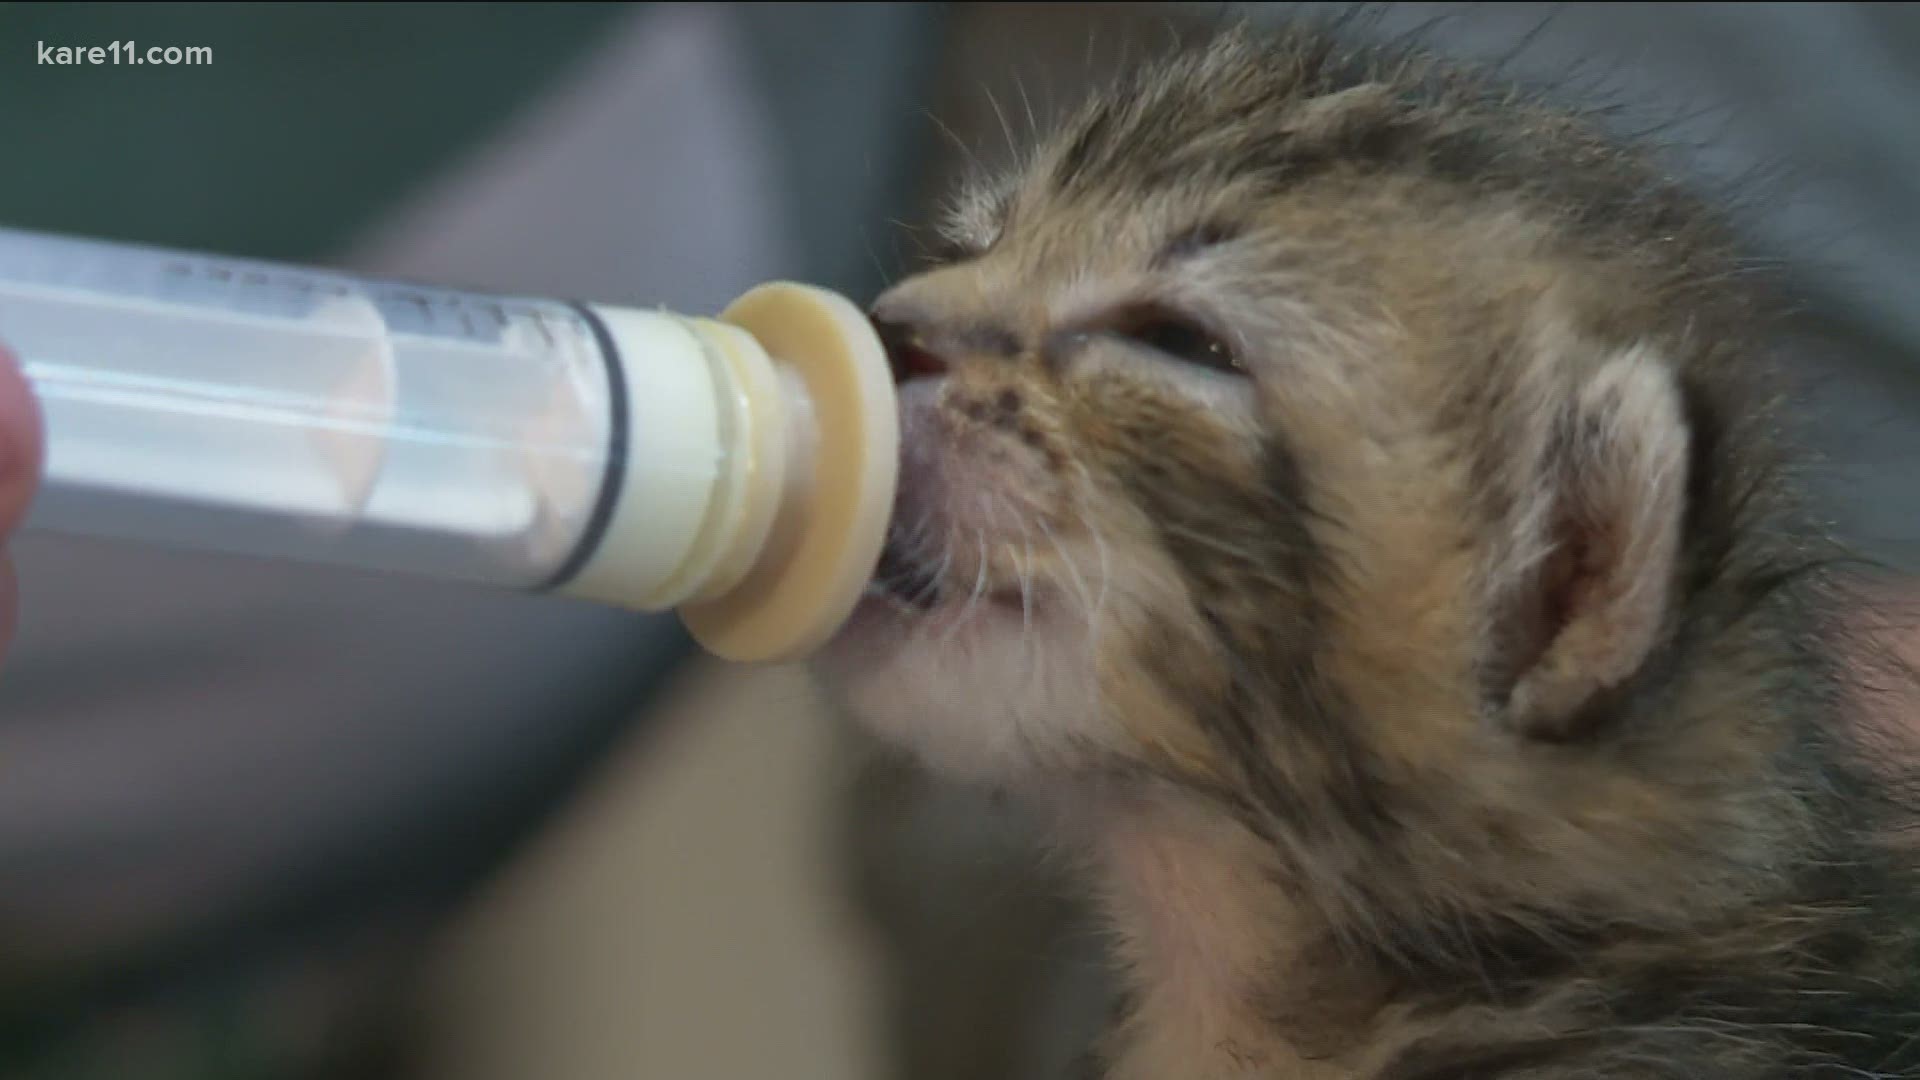 Bitty Kitty Brigade is a foster-based rescue for orphaned, neonatal kittens. In the first half of 2021, they were able to take in 529 kittens.